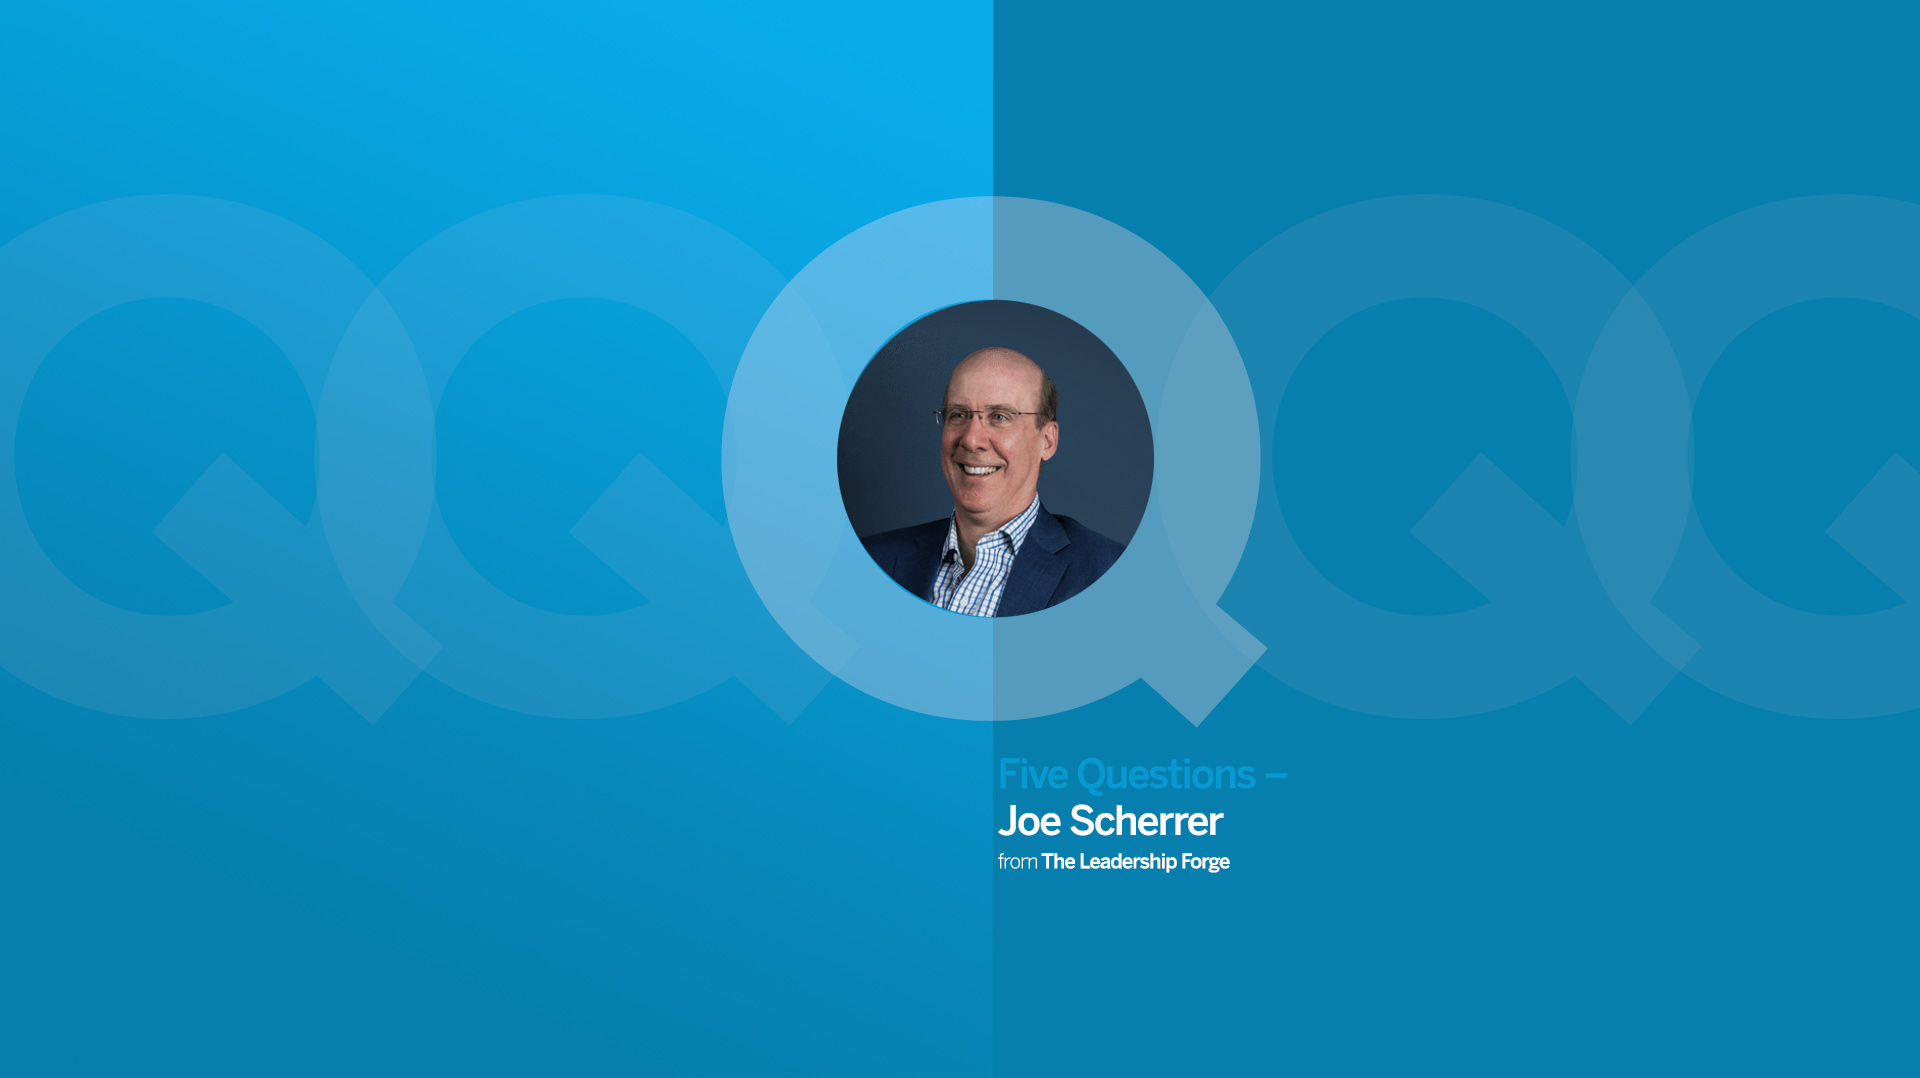 Five Questions with Joe Scherrer from The Leadership Forge